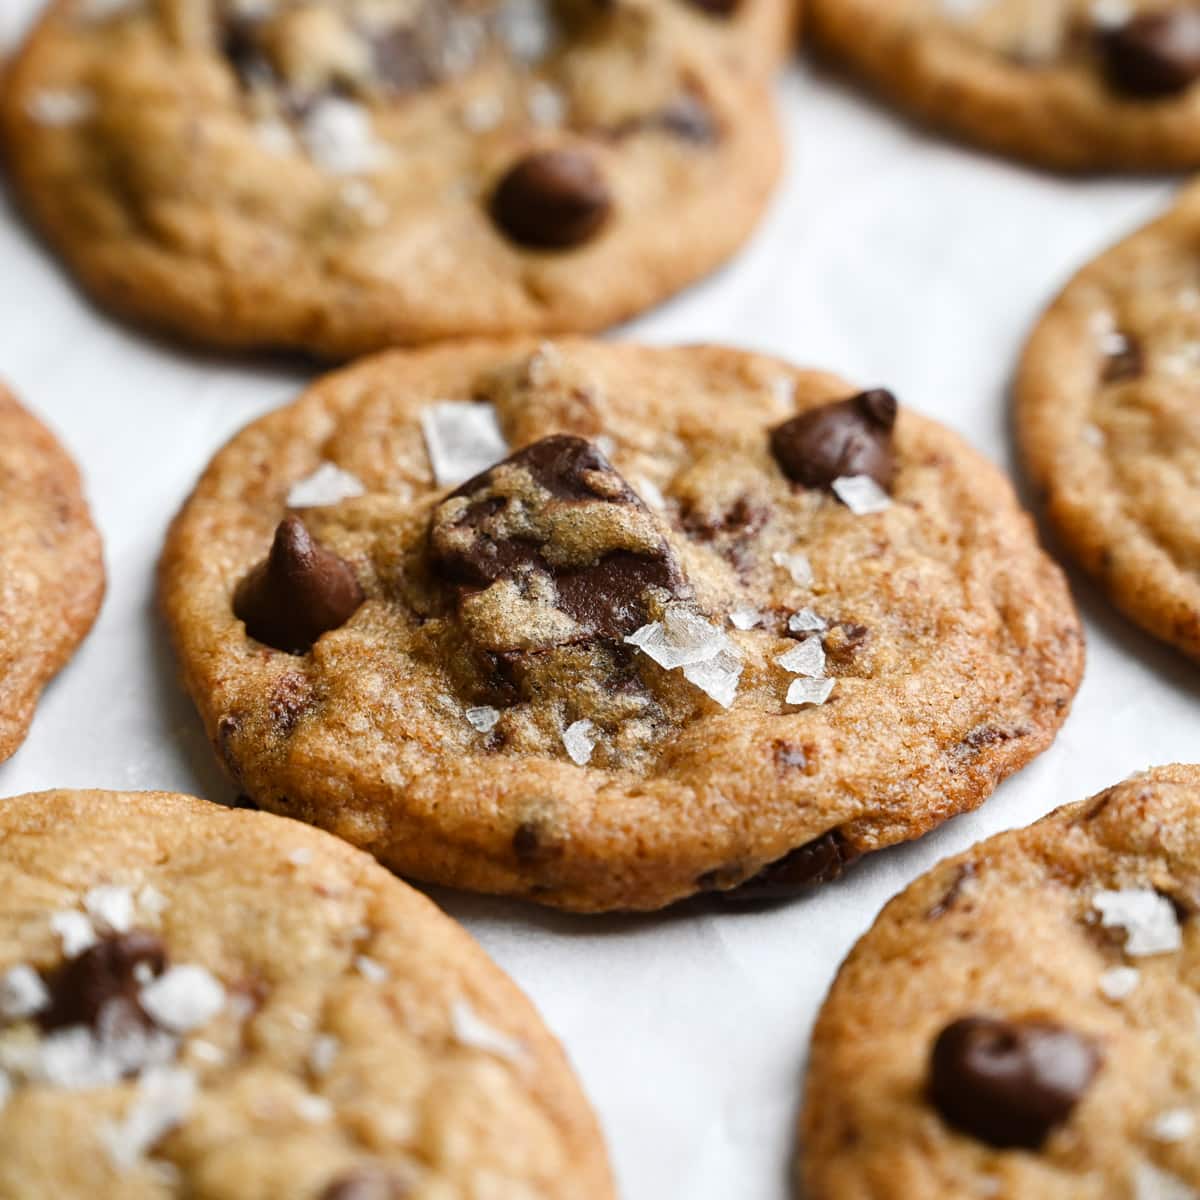 https://www.mythreeseasons.com/wp-content/uploads/2021/12/Brown-Butter-Chocolate-Chip-Cookies-square-1.jpg